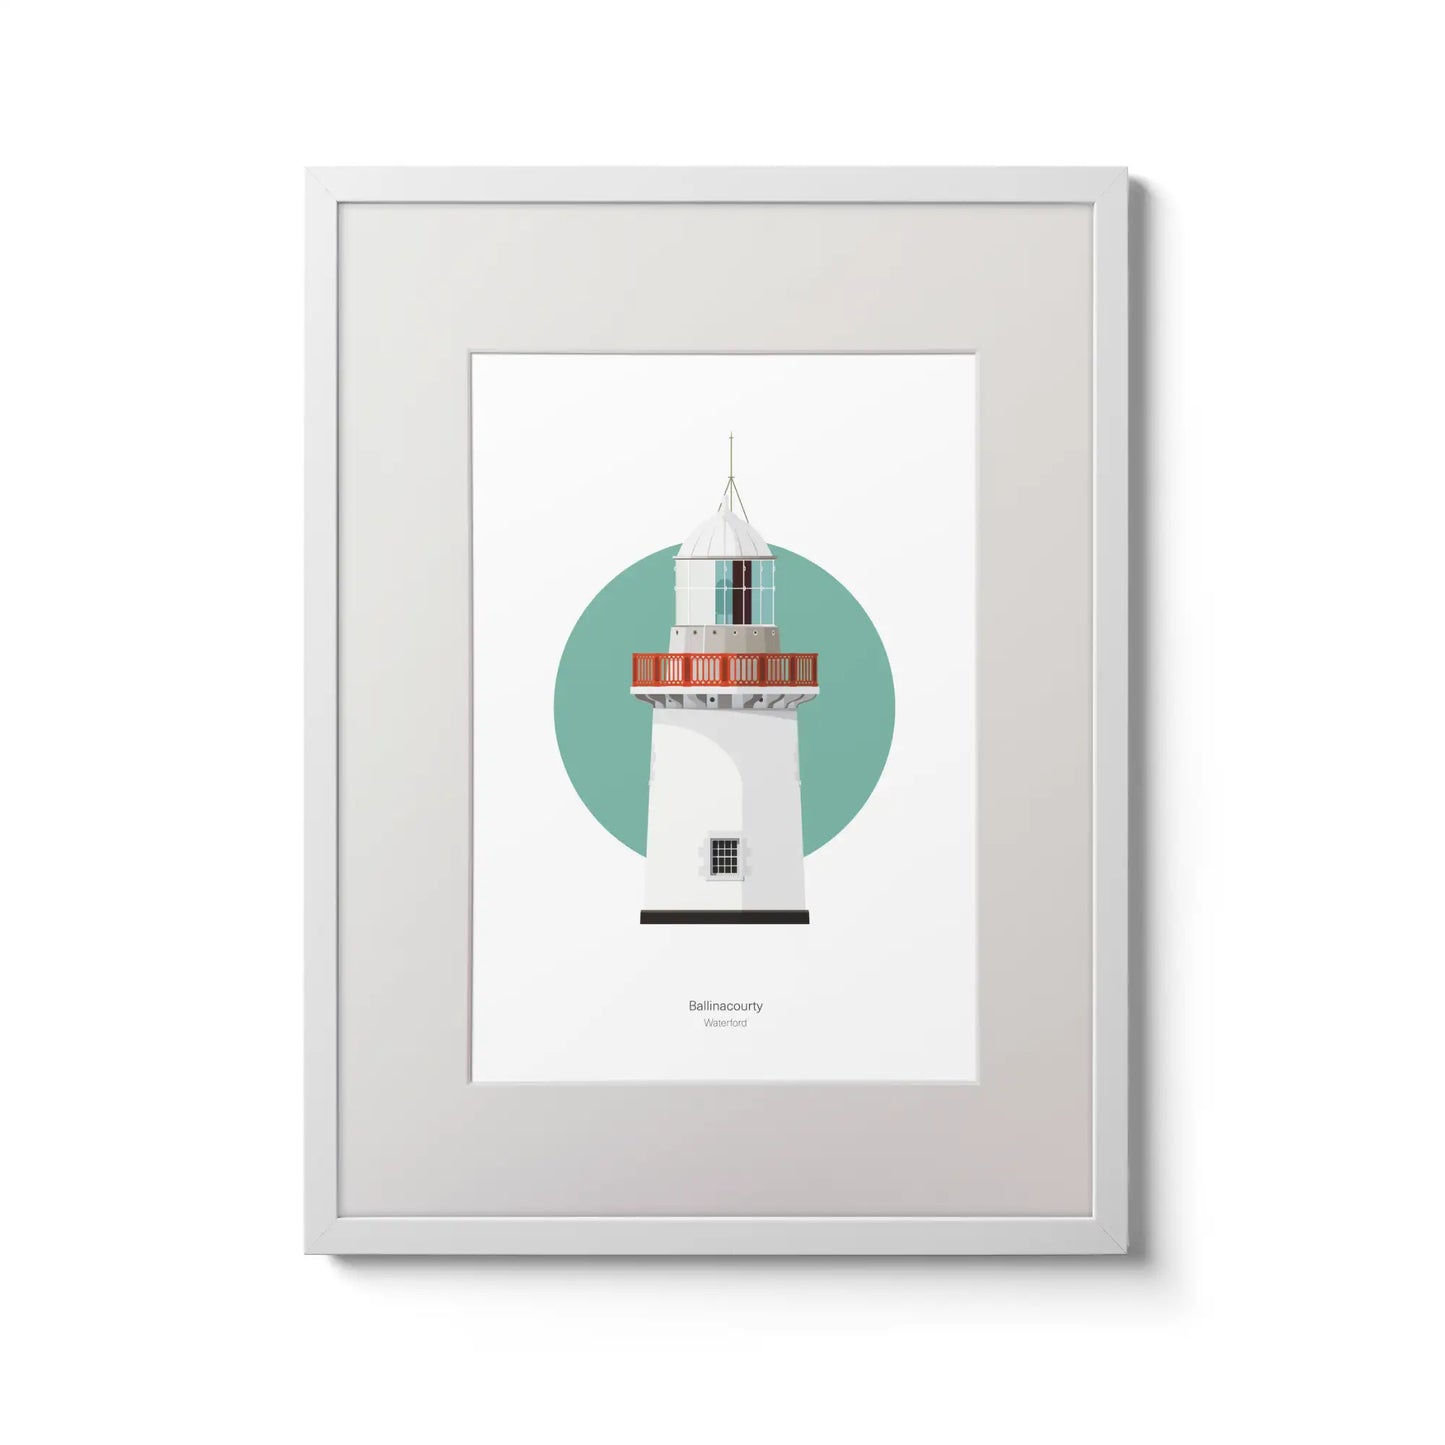 Illustration of Ballinacourty lighthouse on a white background inside light blue square,  in a white frame measuring 30x40cm.